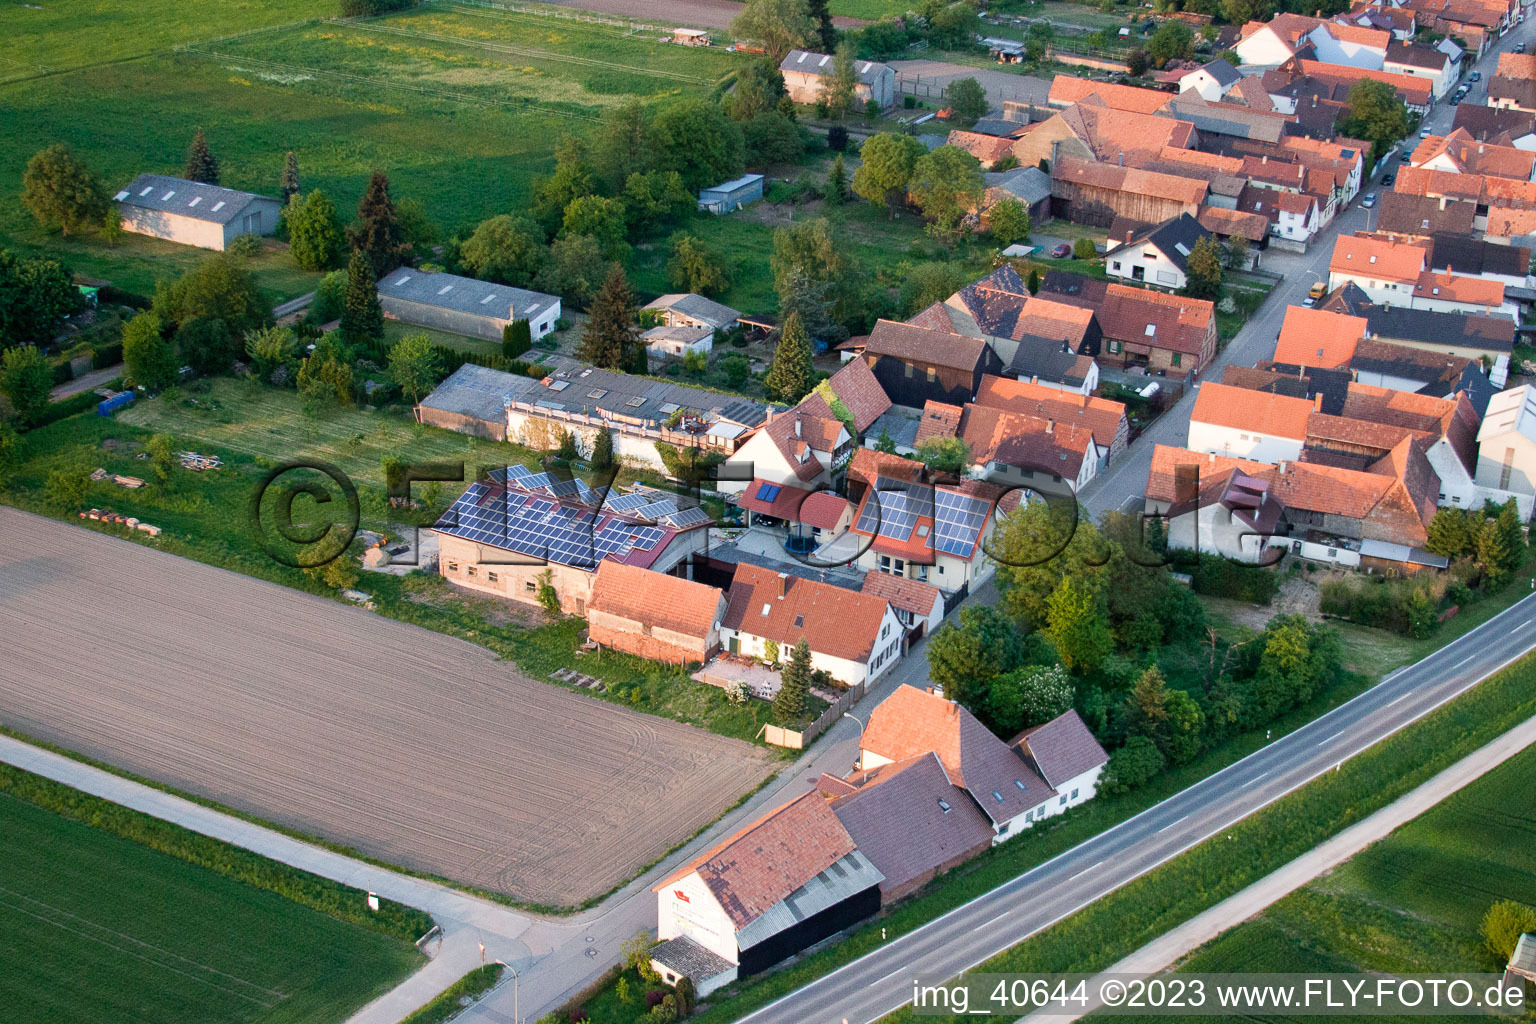 Aerial photograpy of Brehmstr in the district Minderslachen in Kandel in the state Rhineland-Palatinate, Germany